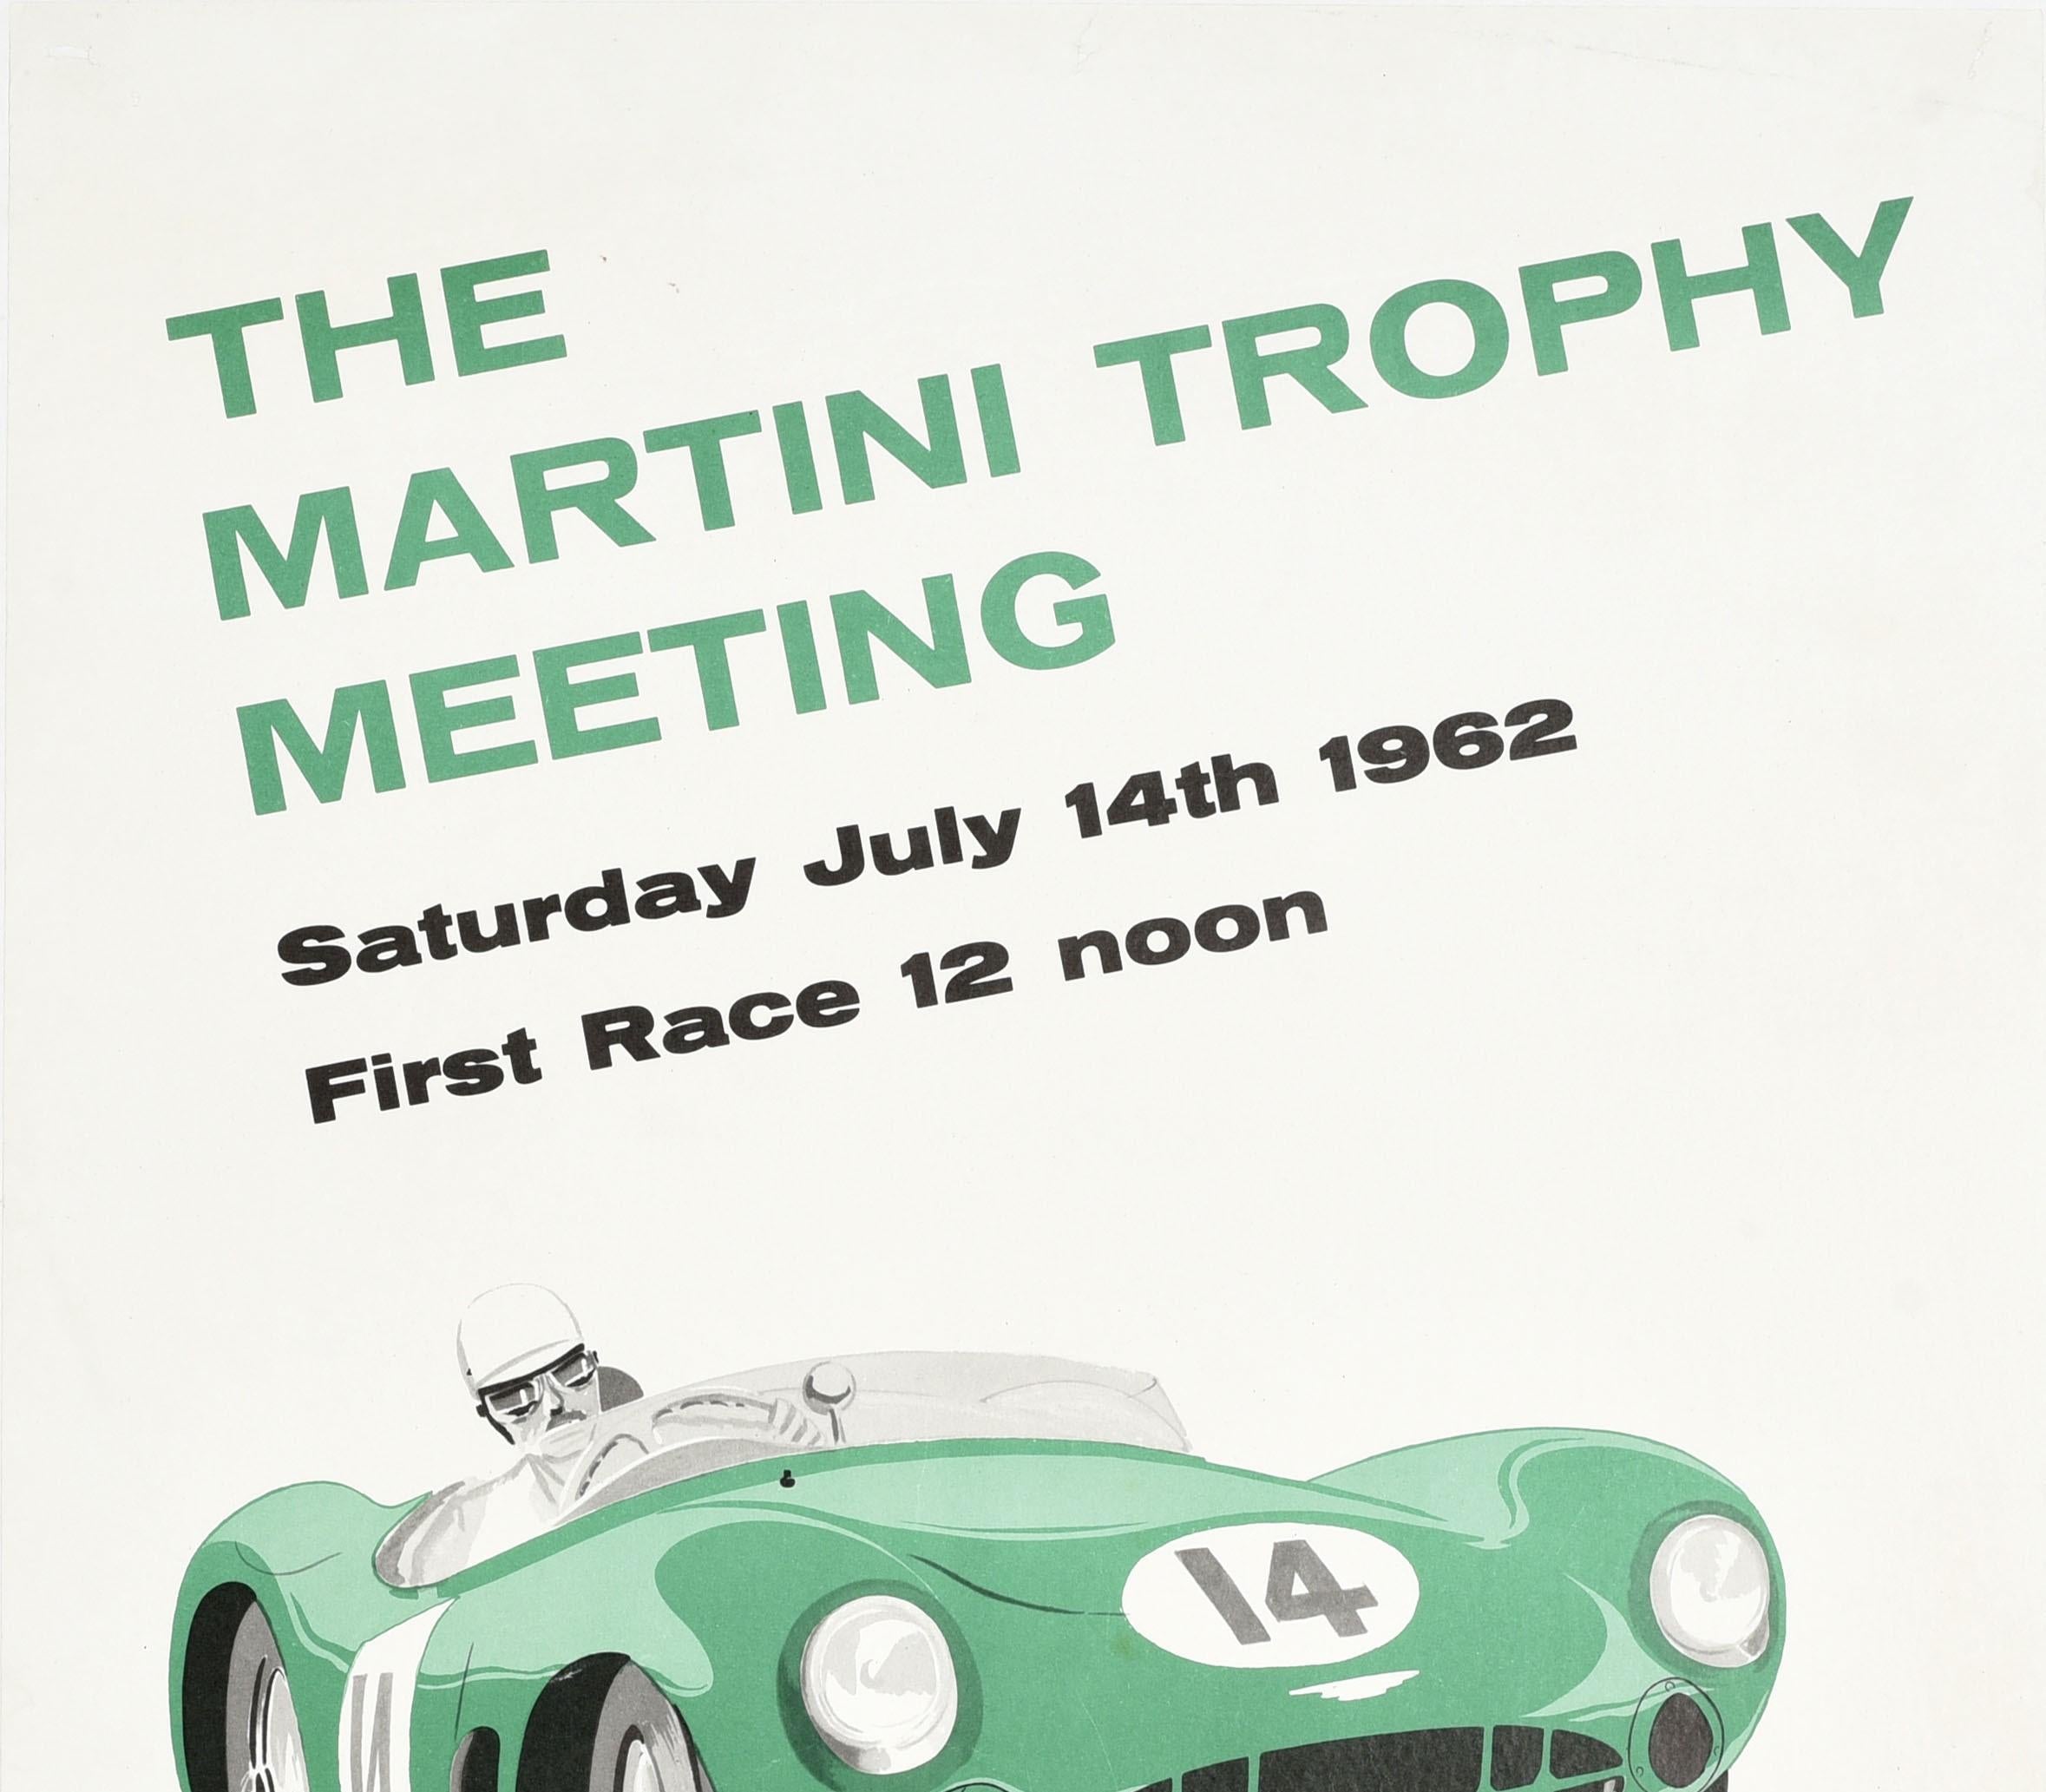 Original vintage motorsport poster advertising The Martini Trophy Meeting auto racing event at the Silverstone Grand Prix Circuit on Saturday 14 July 1962 organised by the Aston Martin Owners Club featuring a great design showing a driver in a